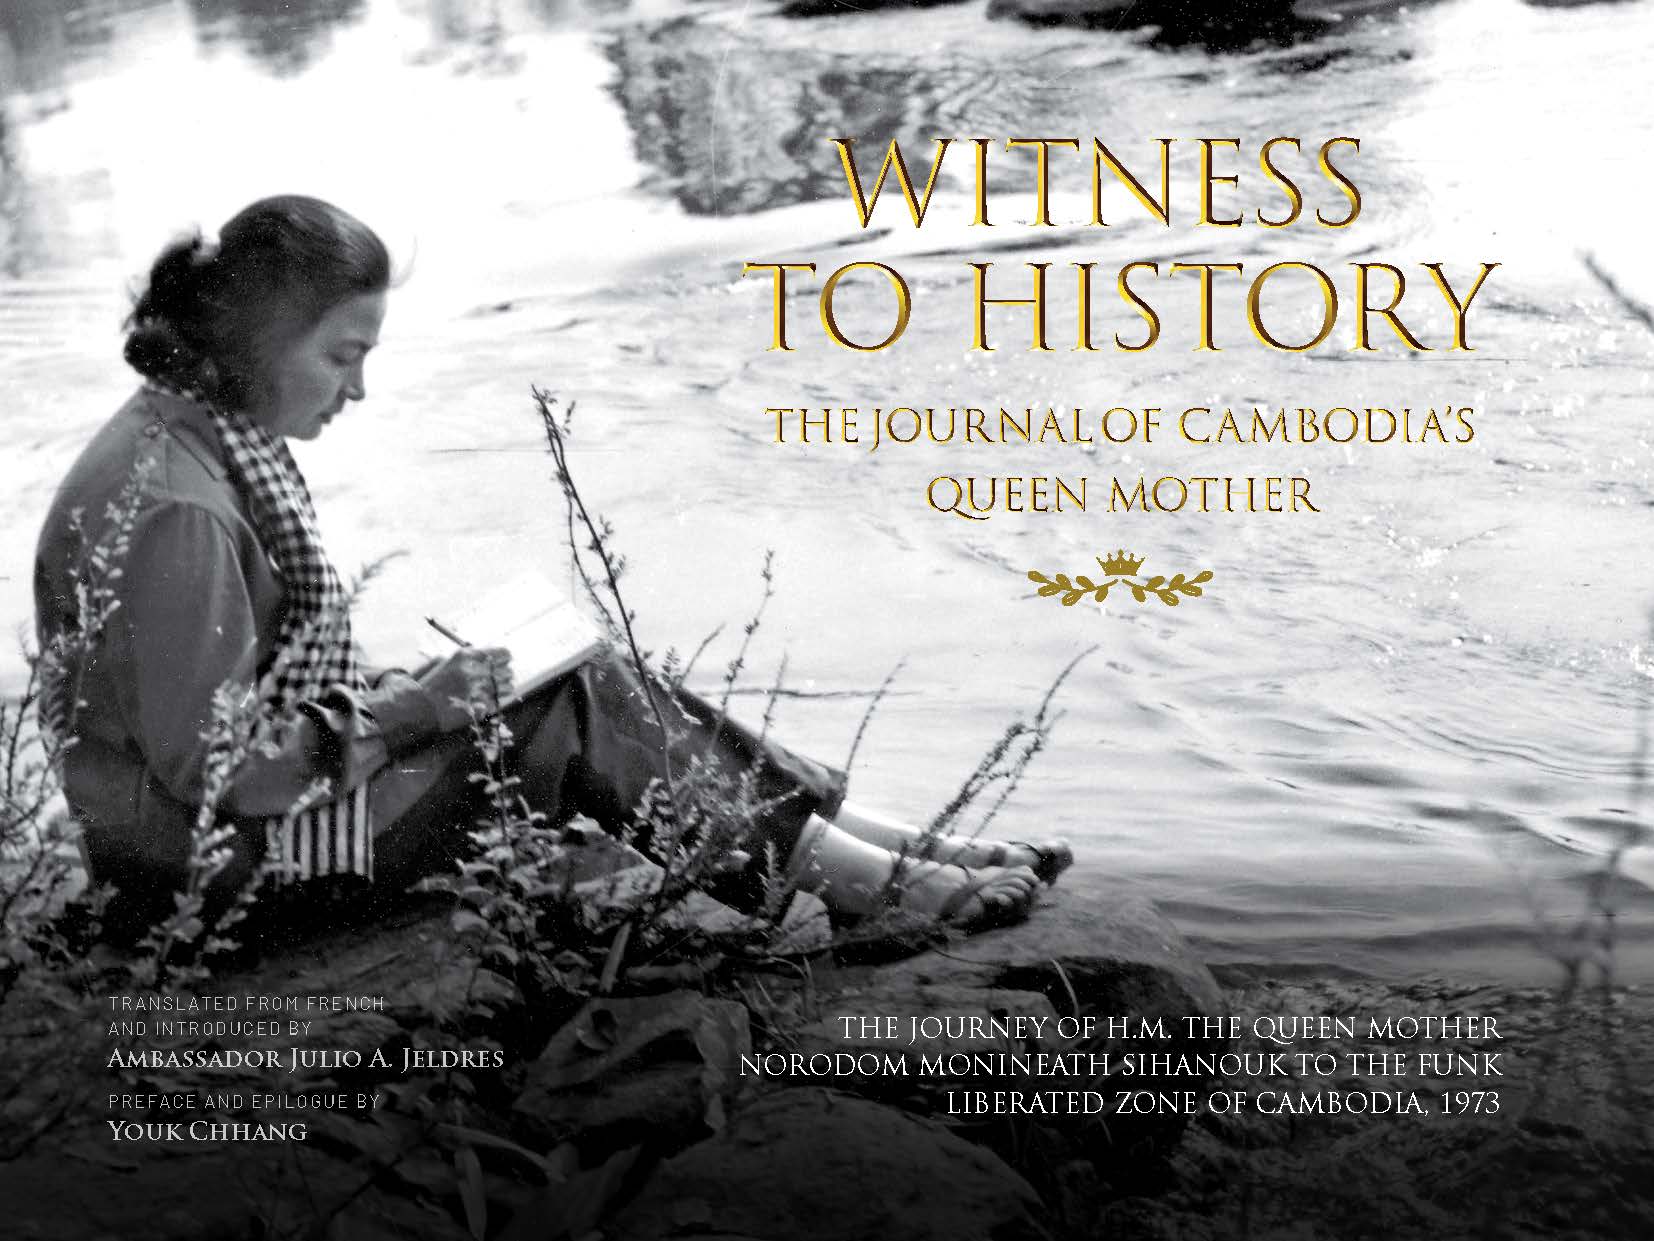 WITNESS TO HISTORY THE JOURNAL OF CAMBODIA'S QUEEN MOTHER 2021